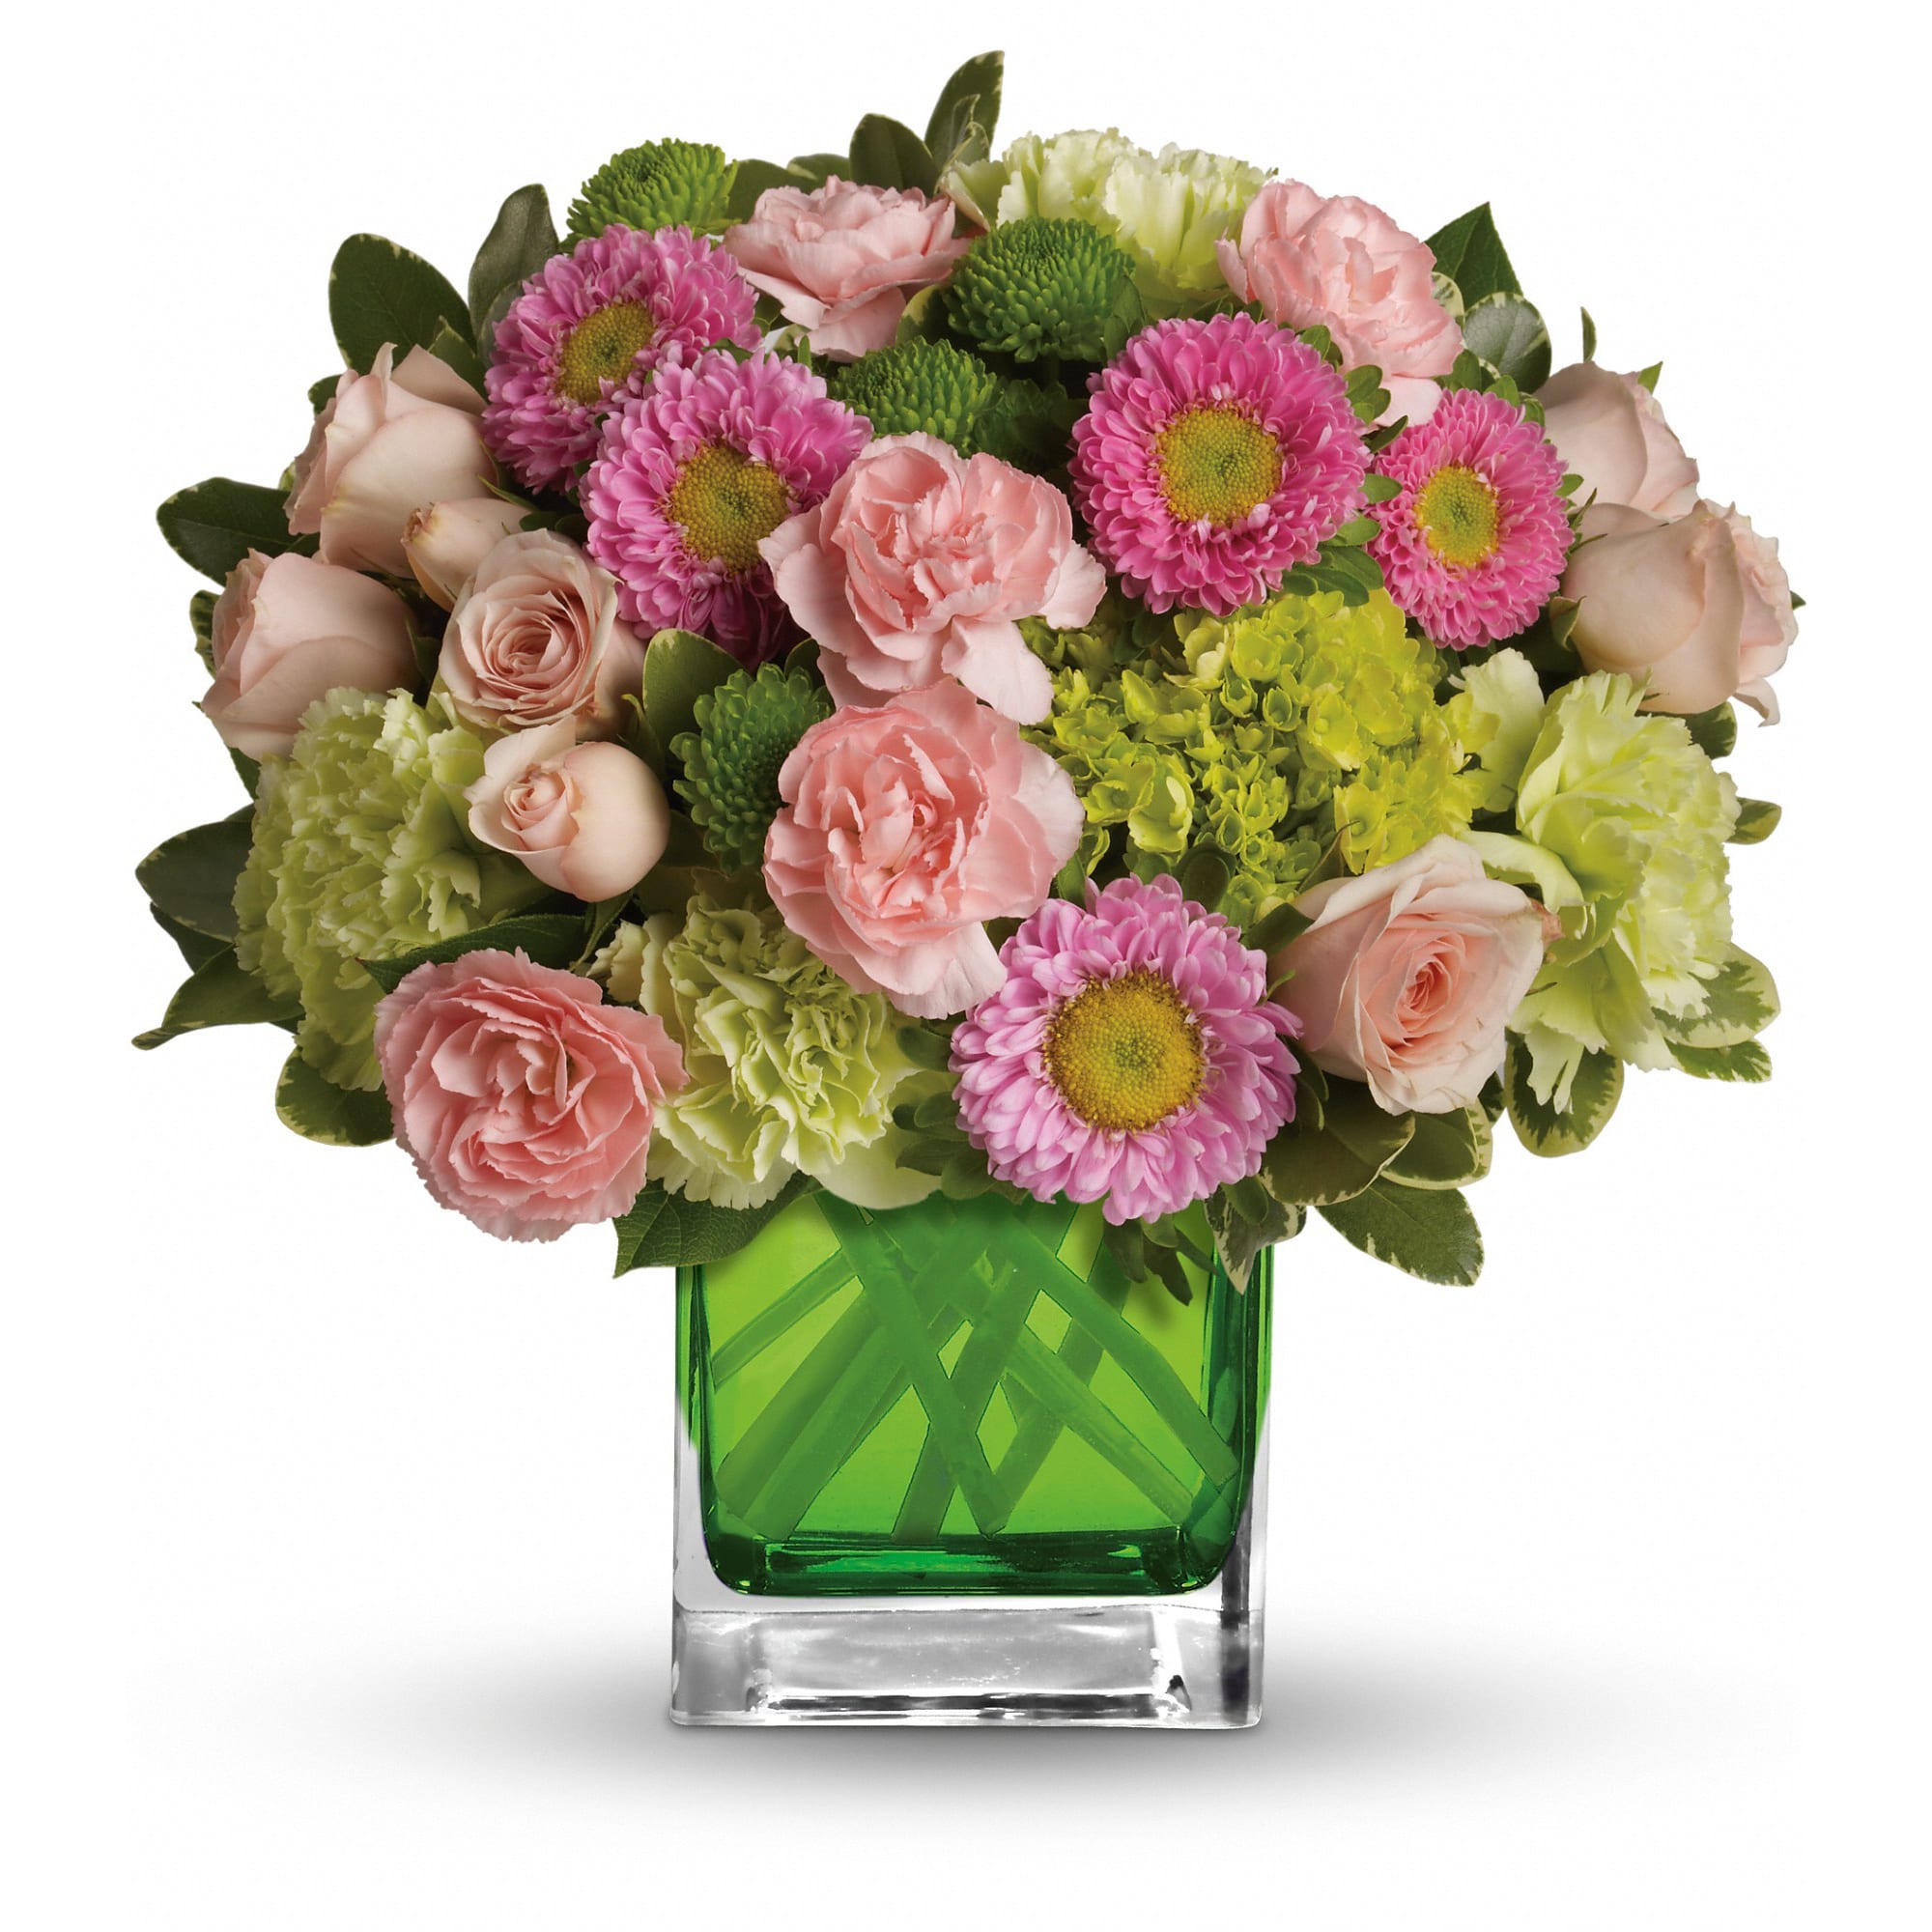 Make Her Day by Teleflora - Sweetly sophisticated, this arrangement of green miniature hydrangea and light pink spray roses presented in our citrus green glass cube is the perfect gift.    Includes green miniature hydrangea, light pink spray roses, green carnations, pink miniature carnations, pink matsumoto asters and green button spray chrysanthemums accented with assorted greens. Delivered in Teleflora's glass citrus cube.    Approximately 11 1/4&quot; W x 11&quot; H    Orientation: One-Sided    As Shown : TEV20-3A  Deluxe : TEV20-3B  Premium : TEV20-3C